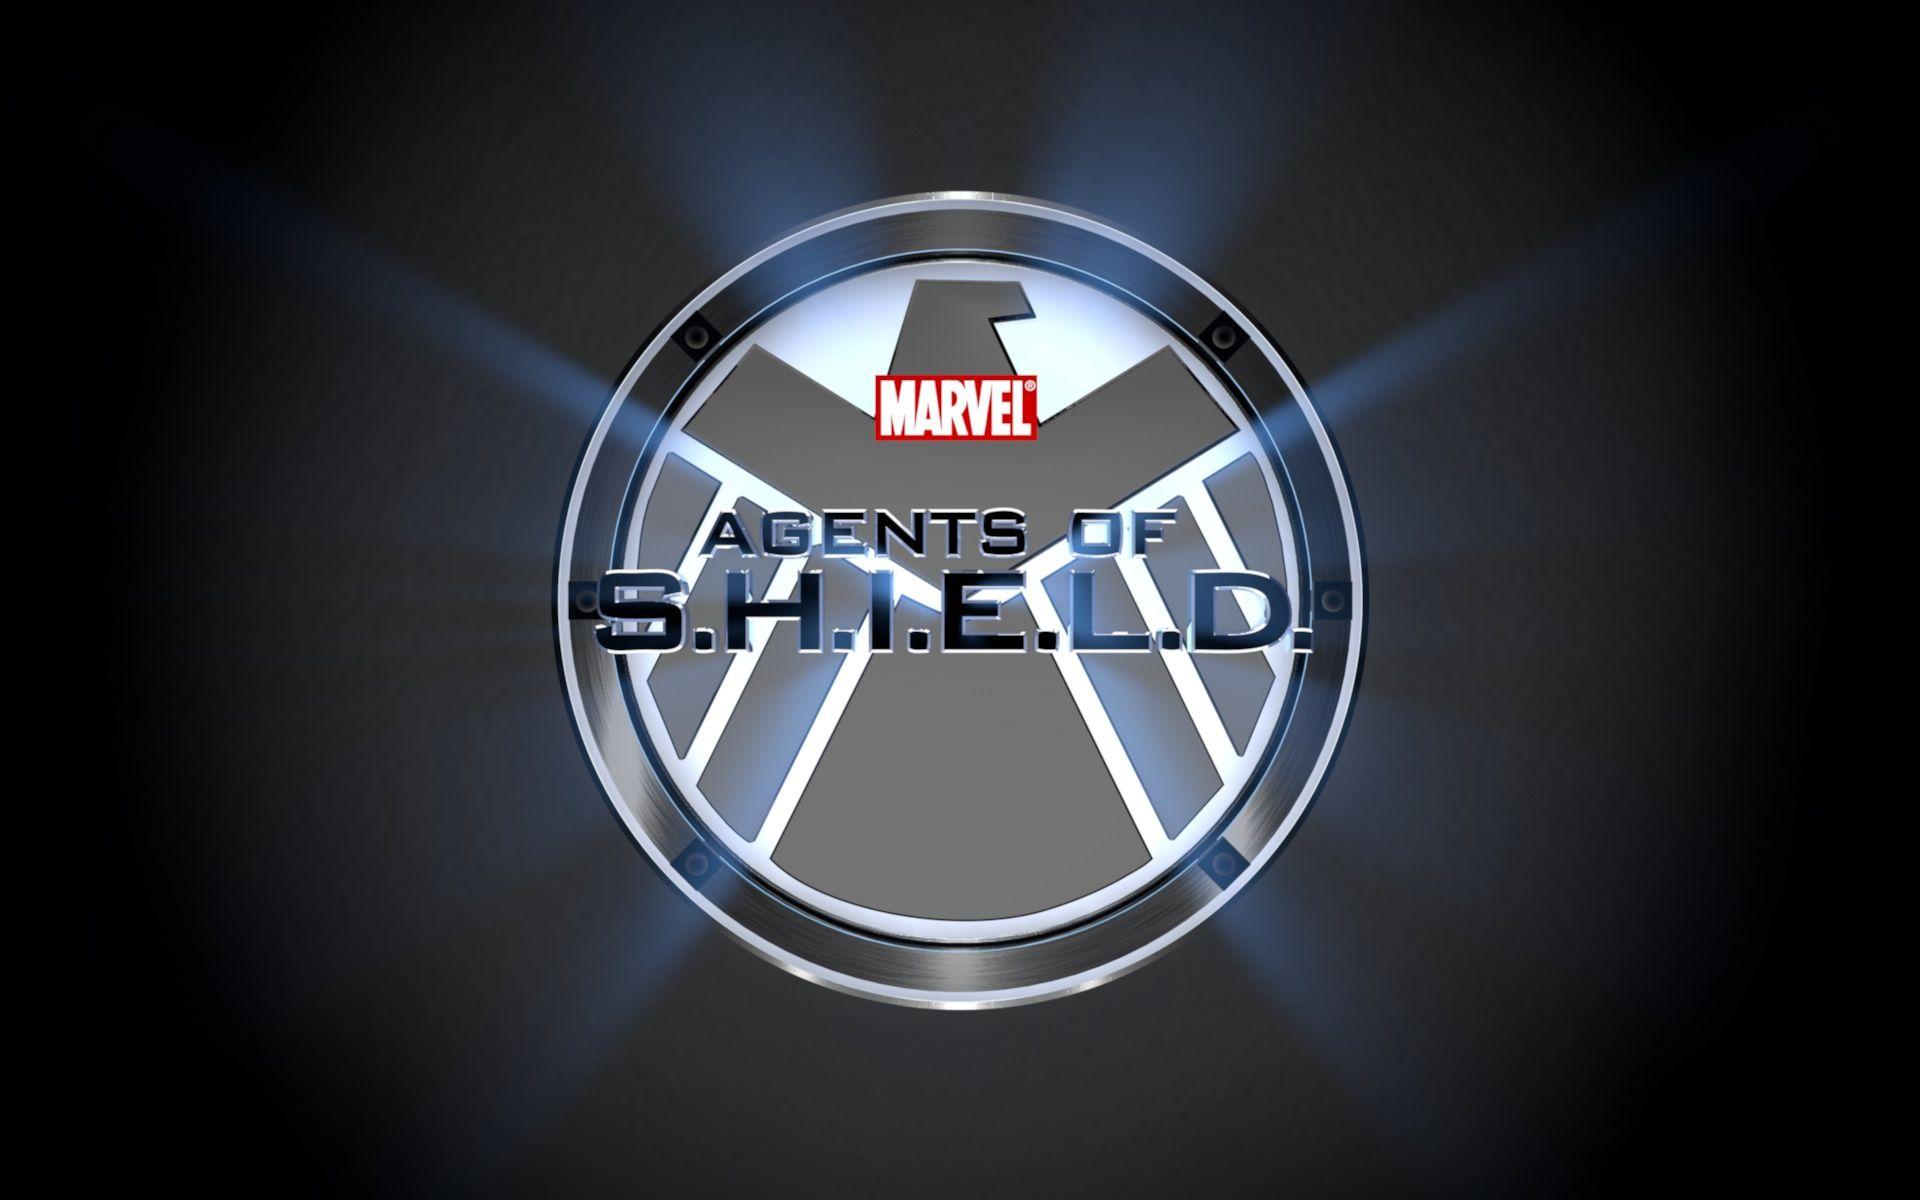 Marvel's Agents of S.H.I.E.L.D, High Definition, High Quality, Widescreen